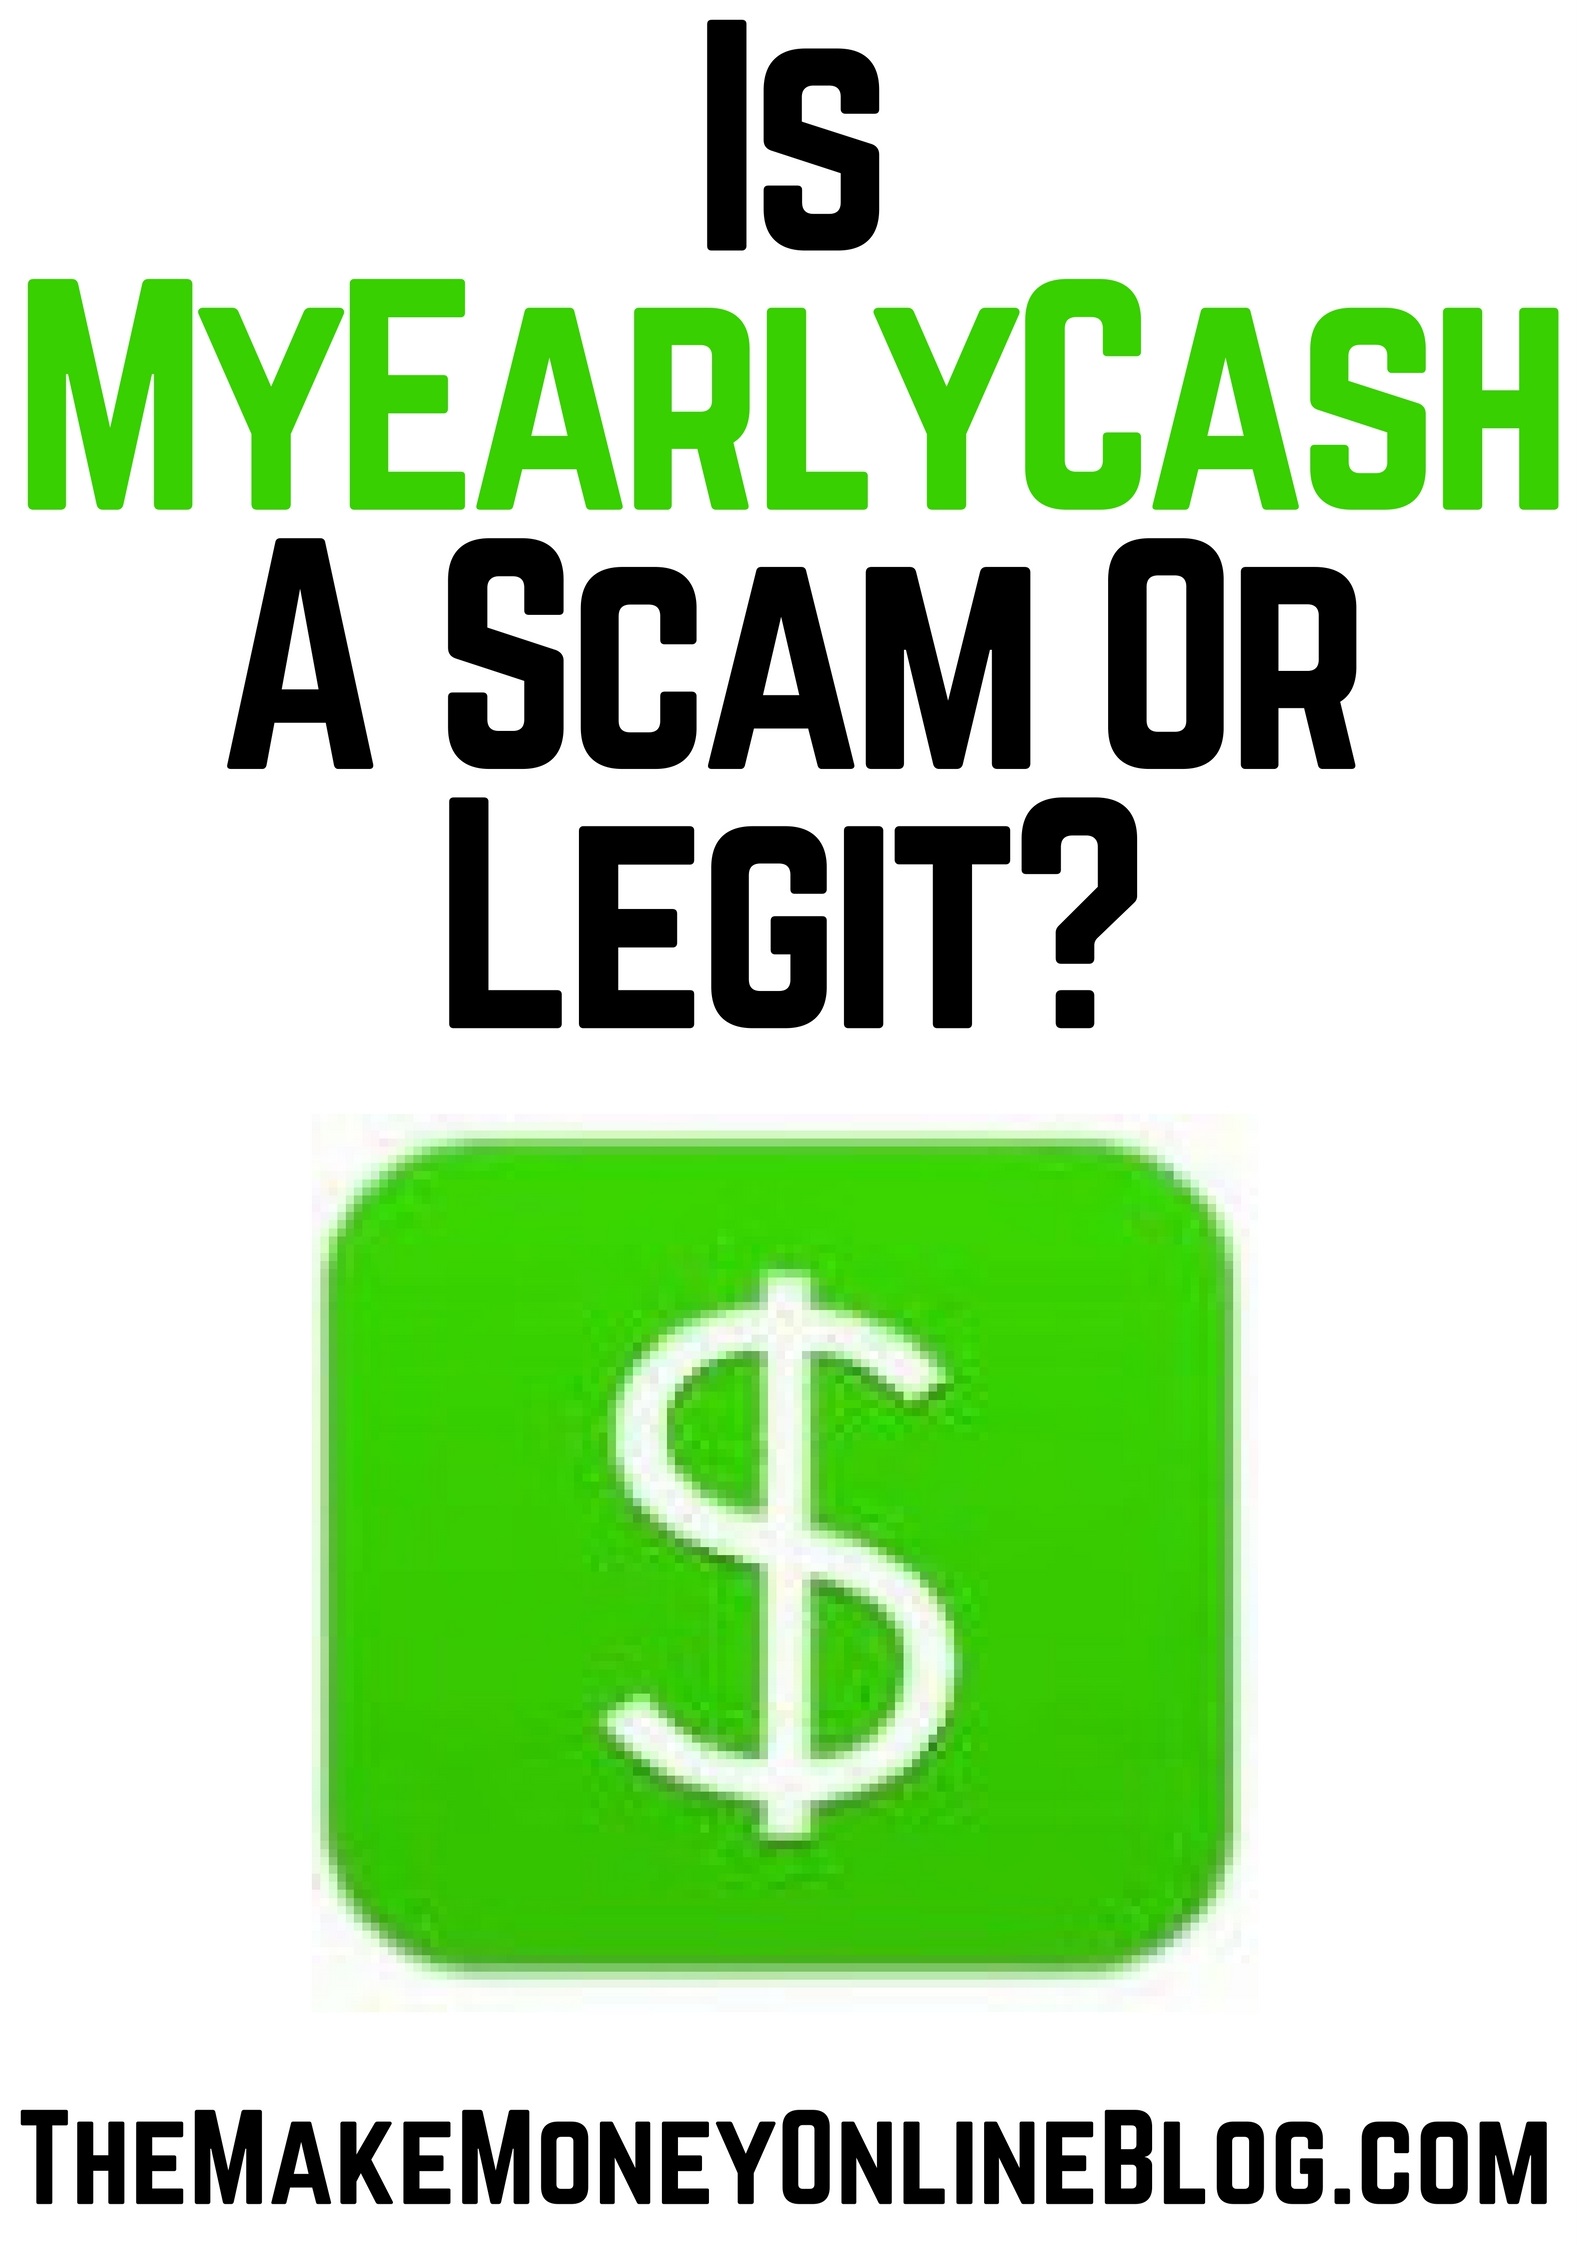 What Is My Early Cash A Scam Or Legit? [REVIEW]